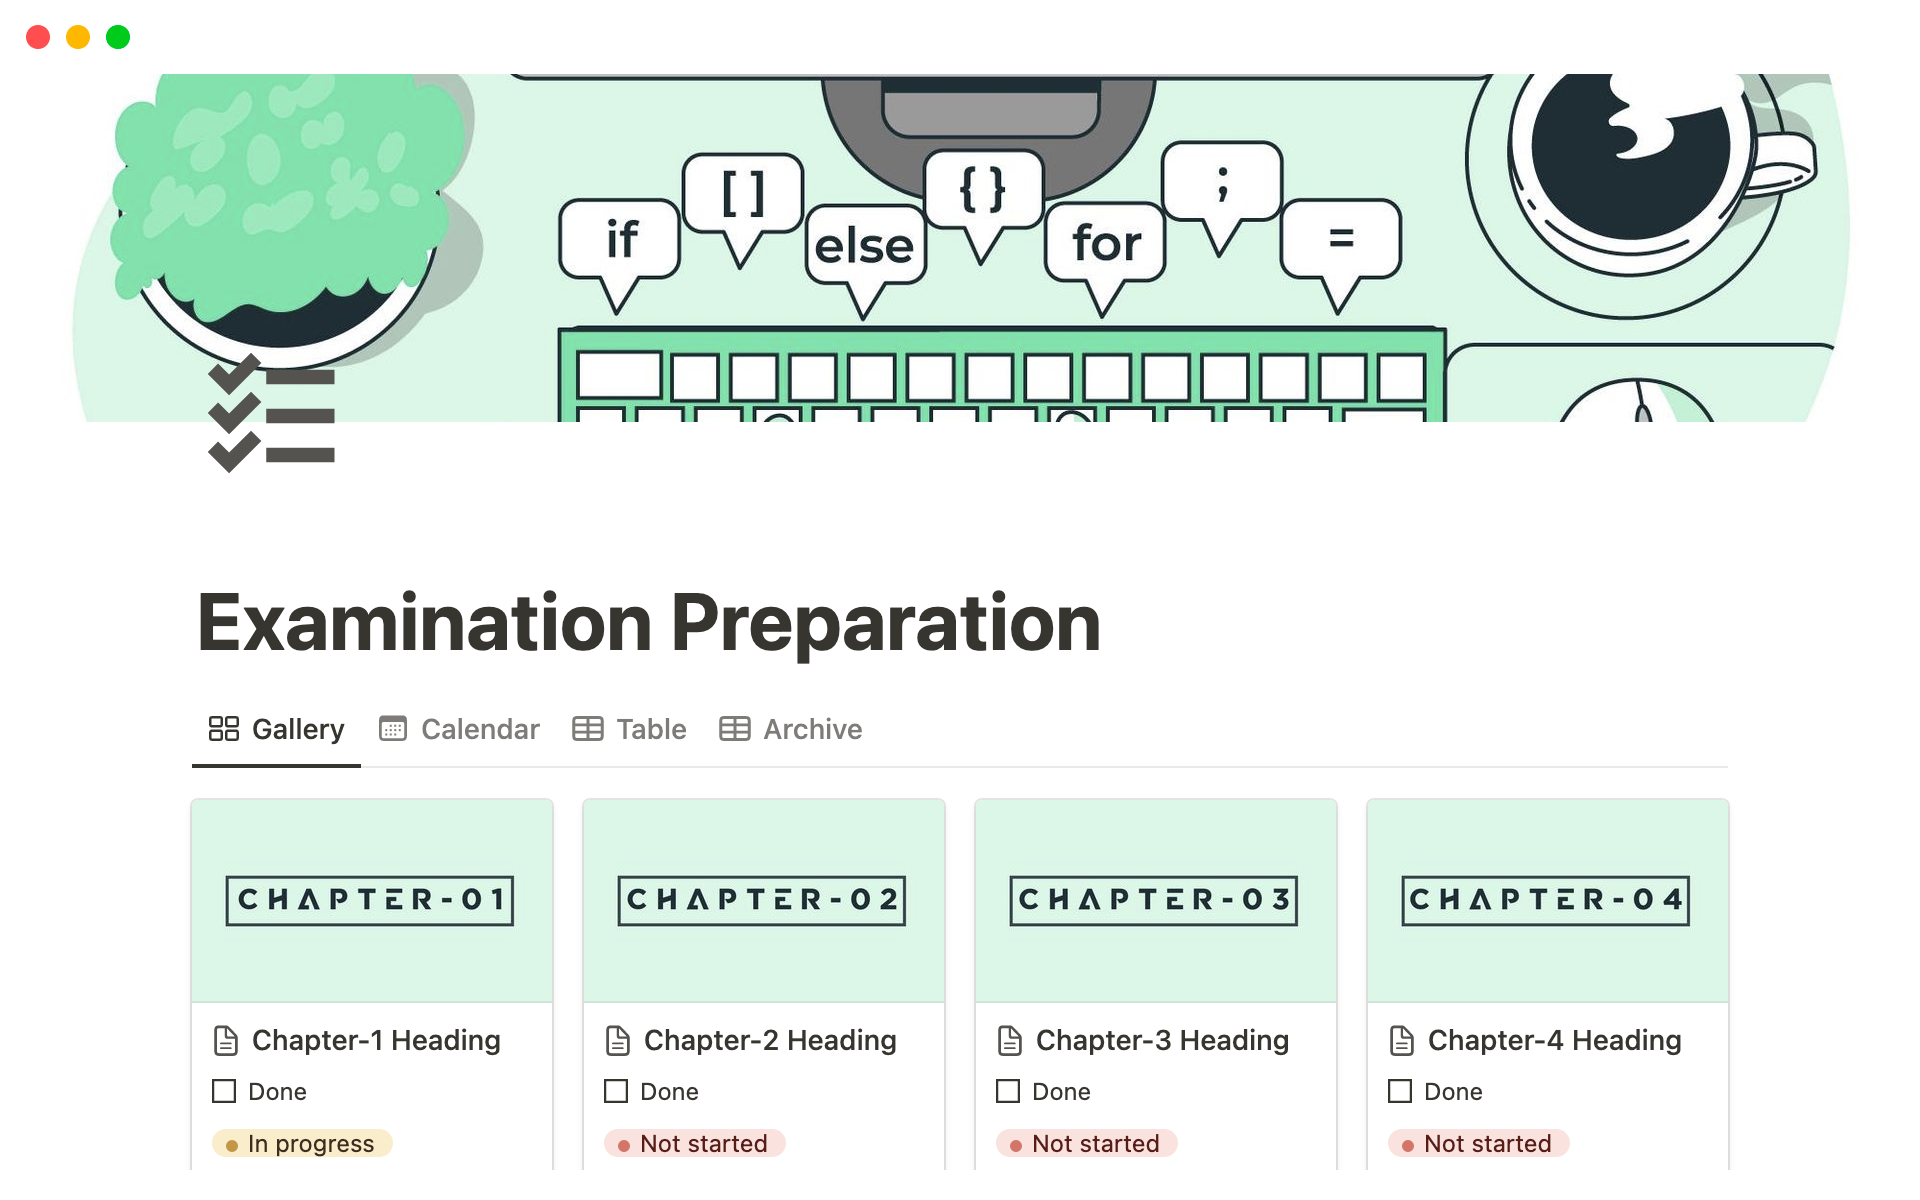 The Ultimate Examination Preparation Notion Template helps students effectively manage their exam preparation schedule, track their progress, and enhance their studying techniques in a seamless and organized manner.